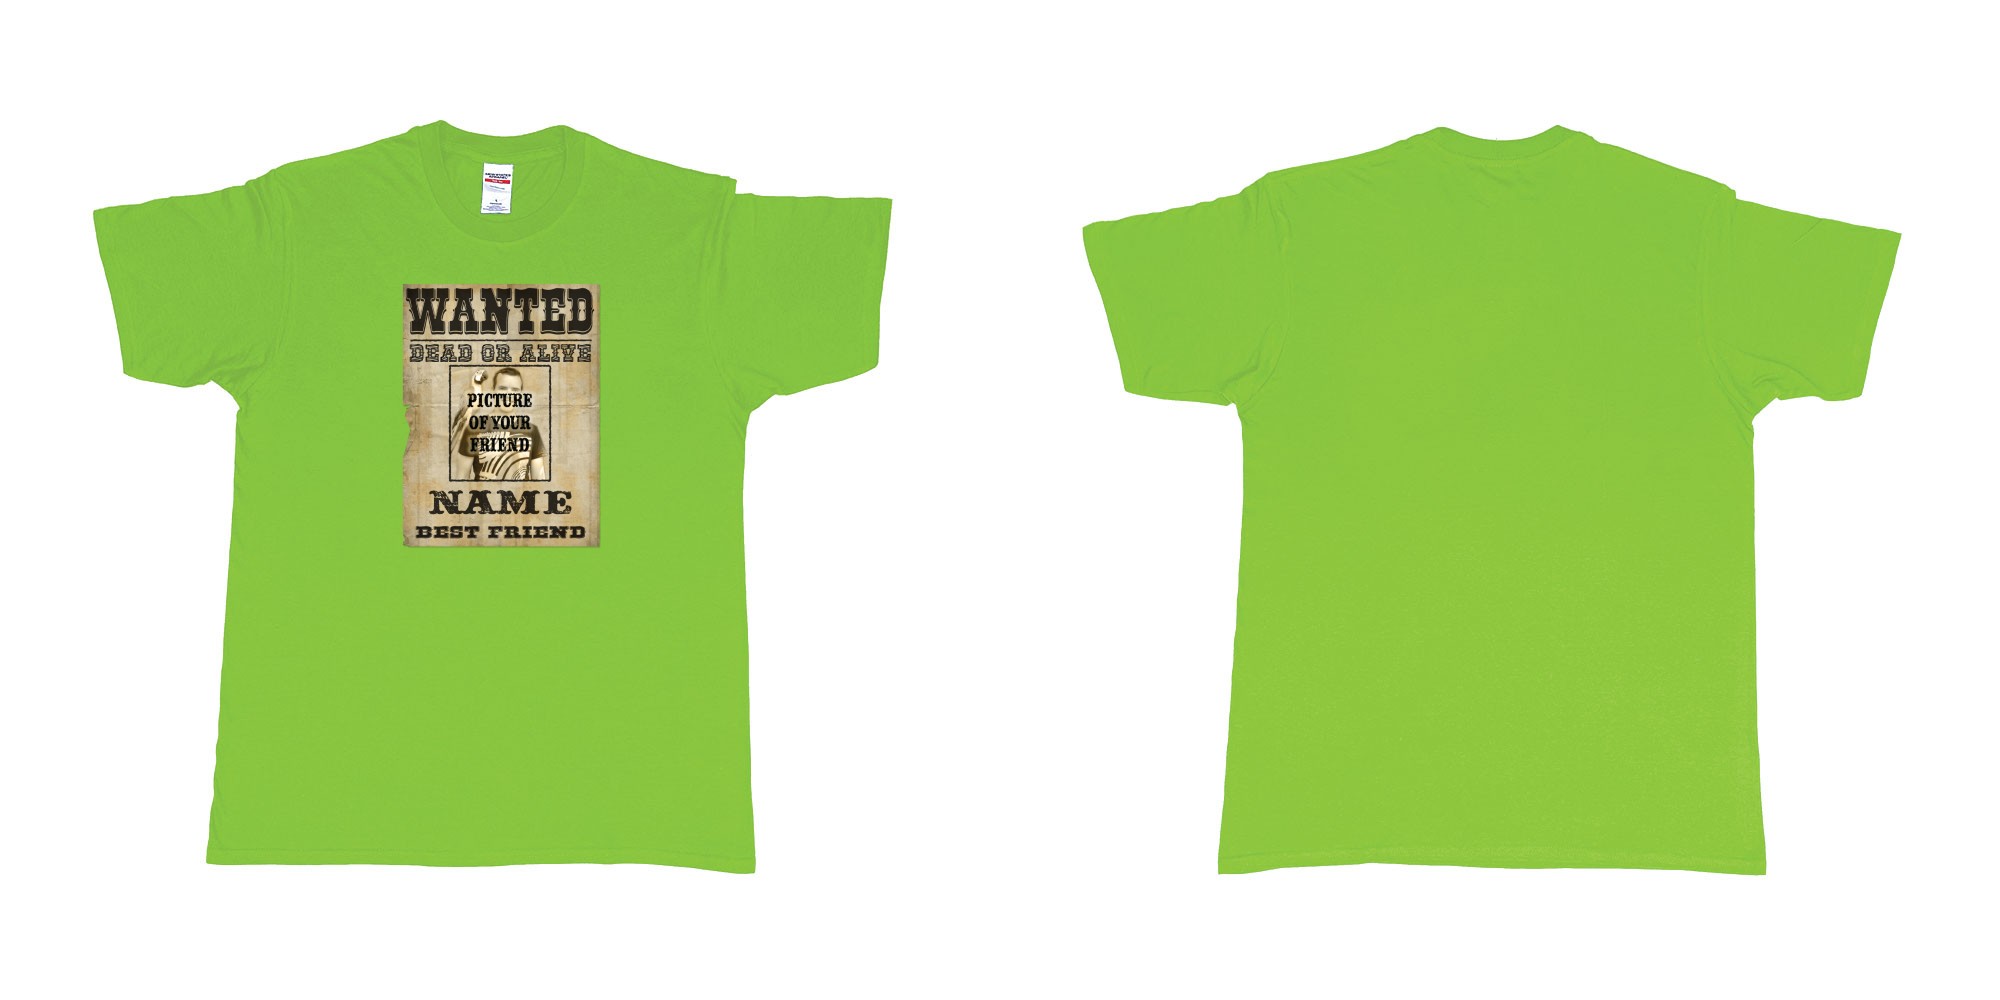 Custom tshirt design Wanted Poster in fabric color lime choice your own text made in Bali by The Pirate Way